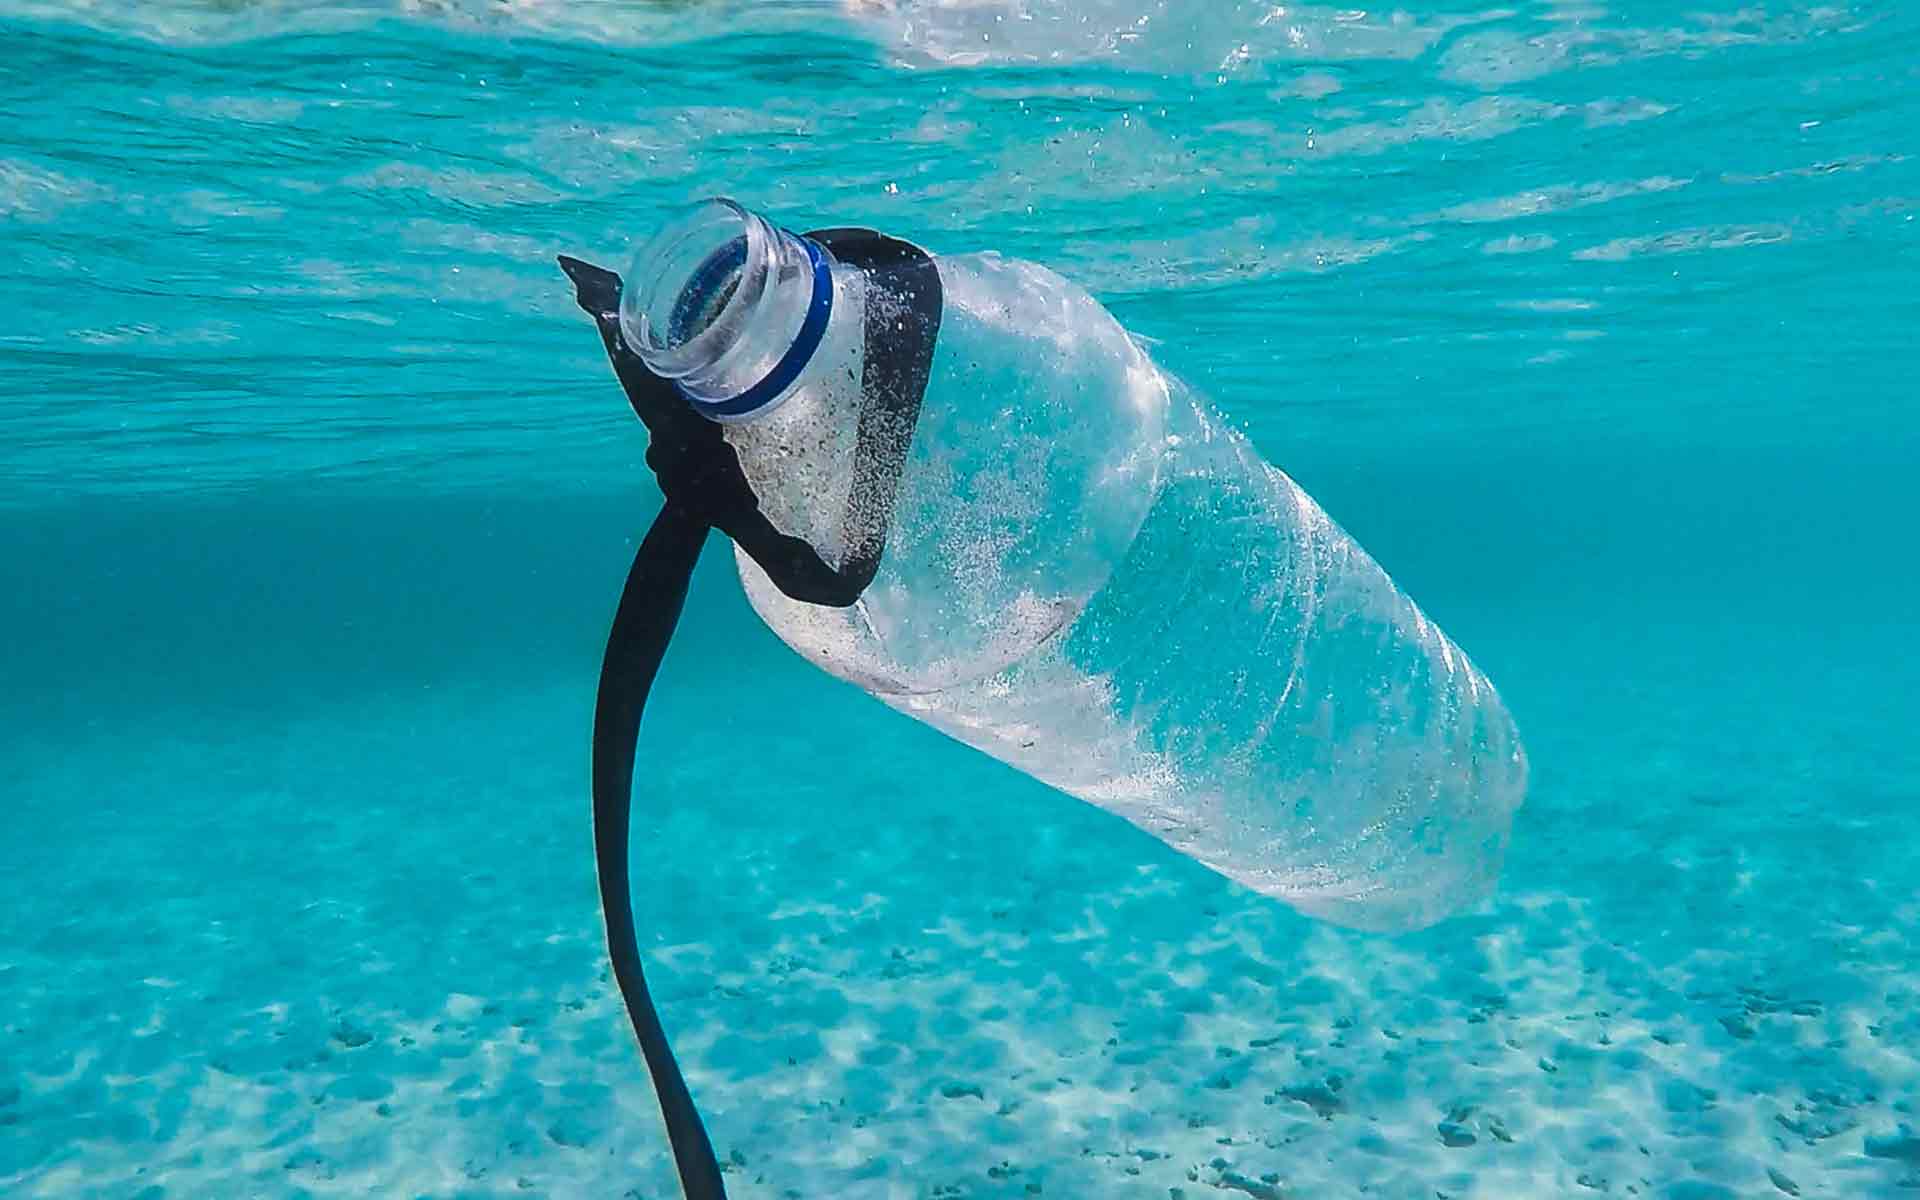 Plastic bottle found in the ocean. Photo by Brian Yurasits on Unsplash.